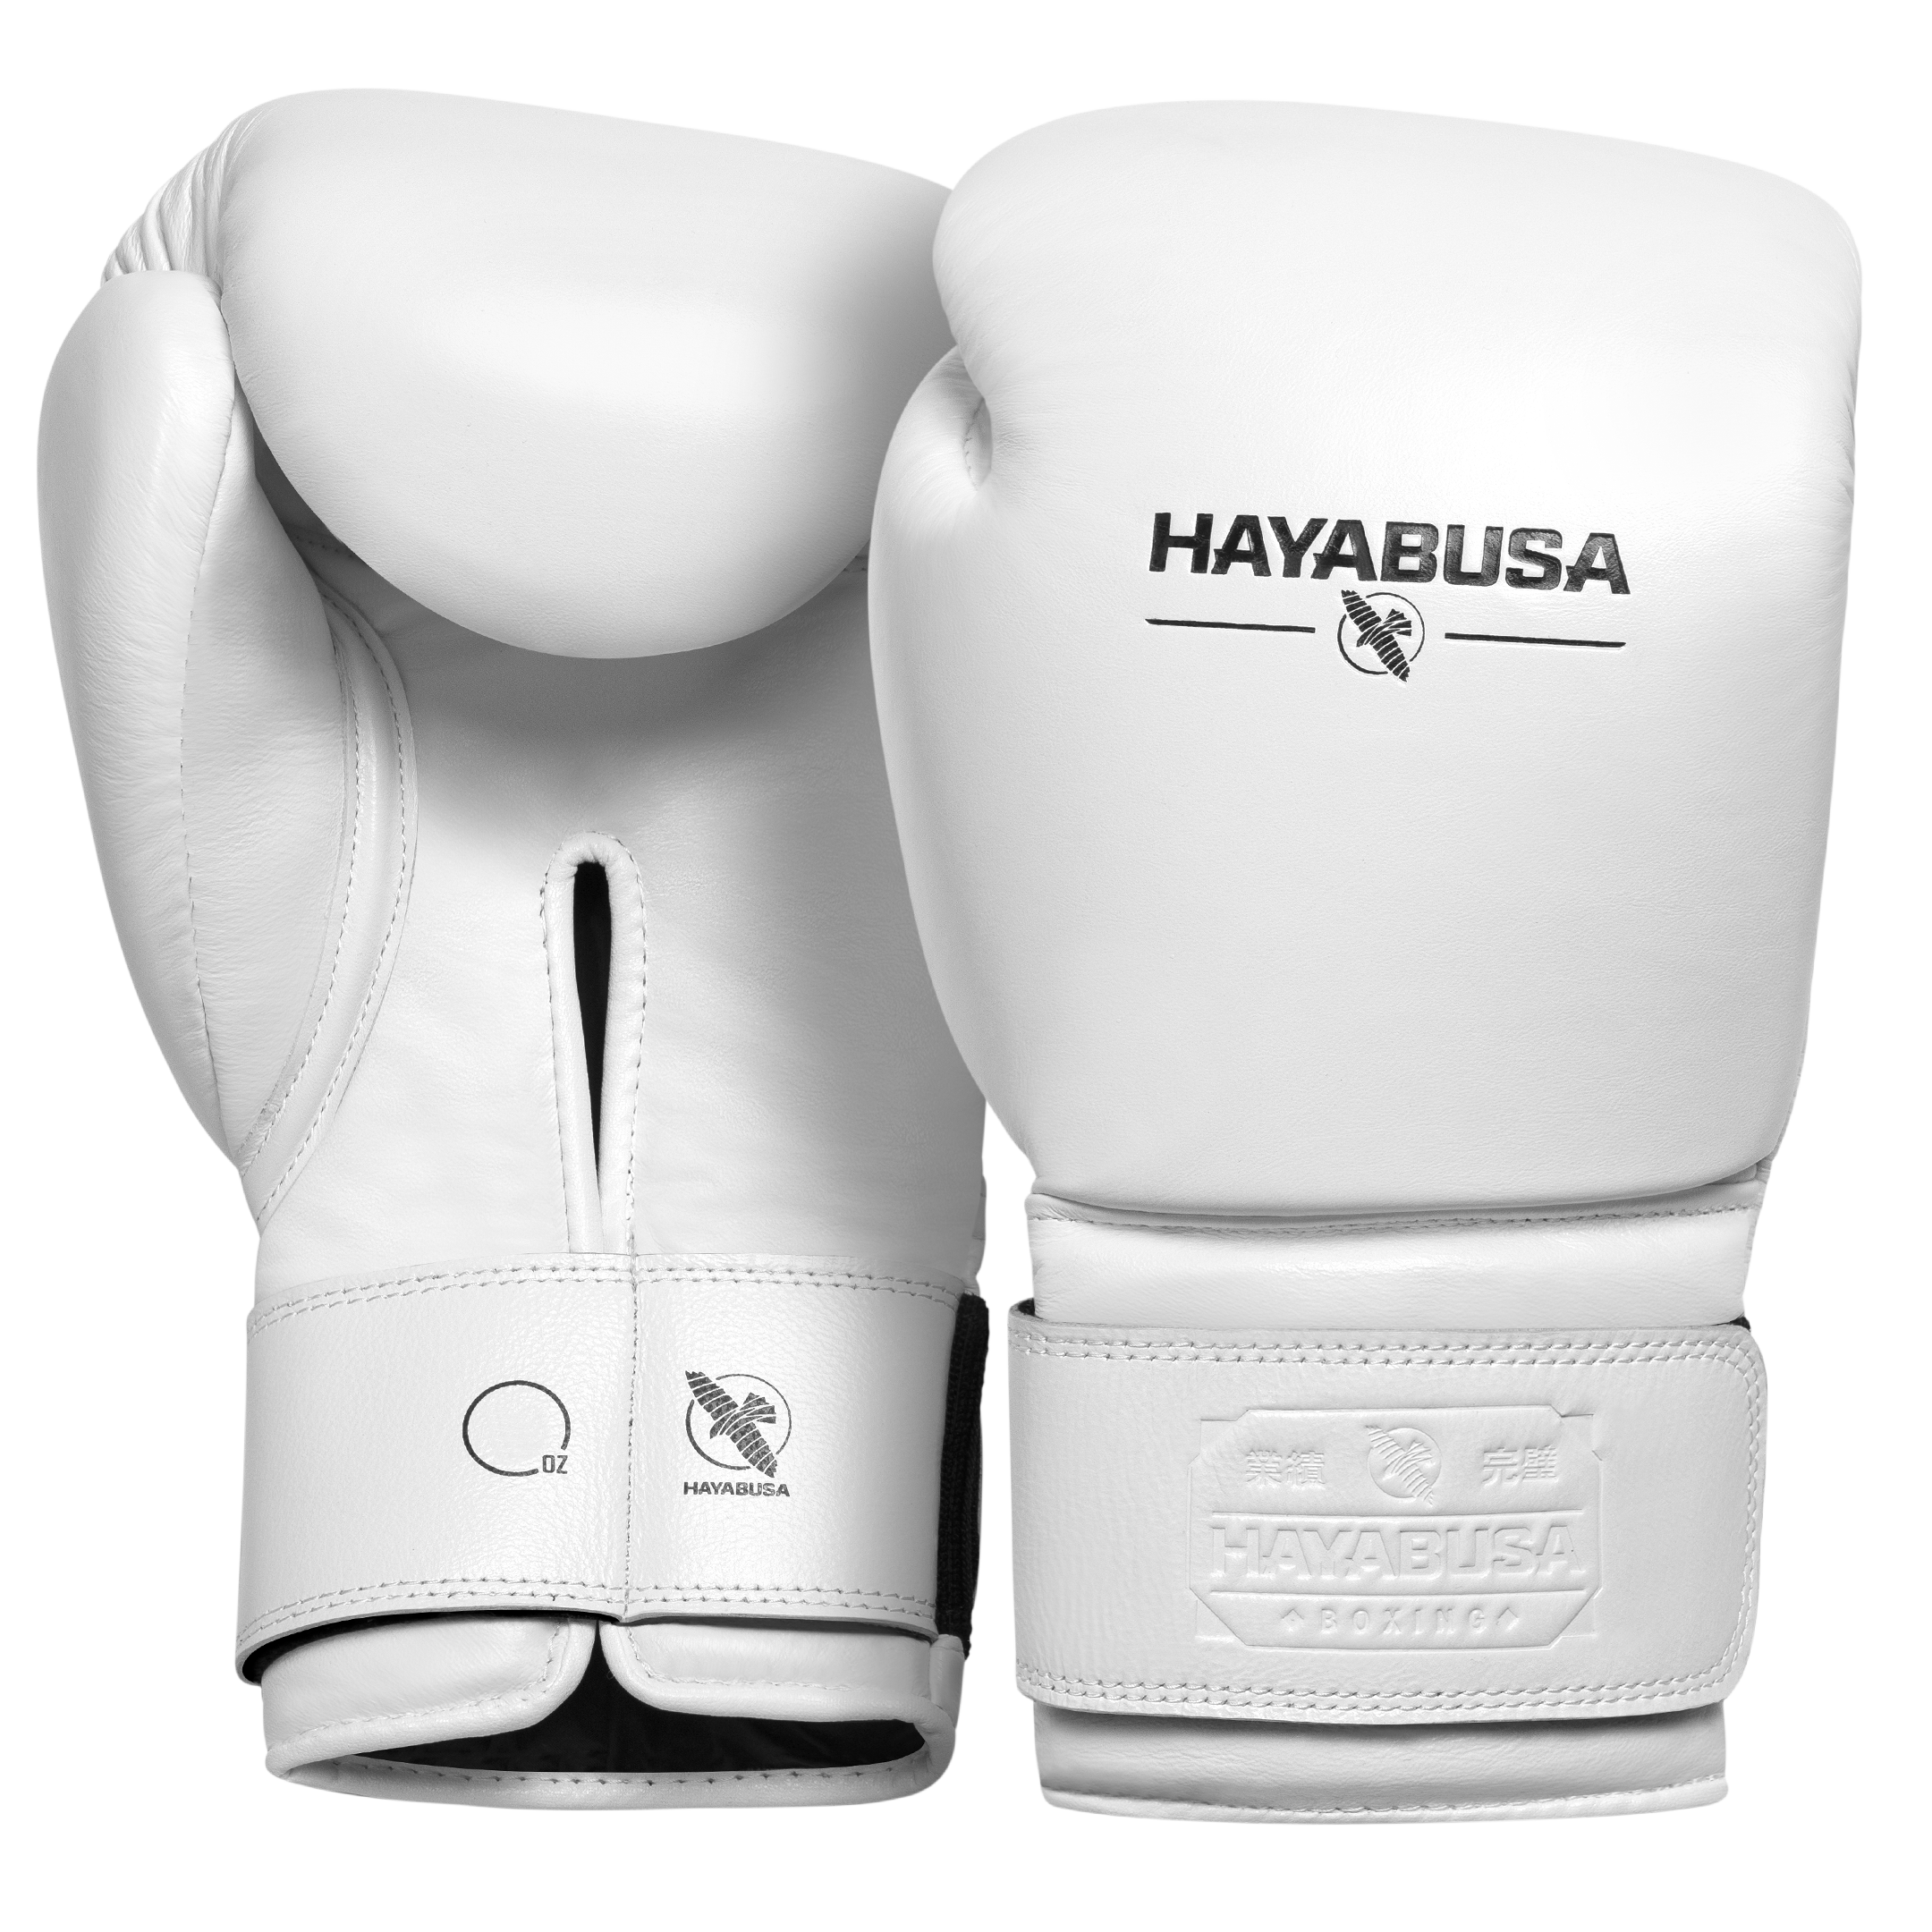 Hayabusa | Boxing Gloves - Pro Boxing Gloves - XTC Fitness - Exercise Equipment Superstore - Canada - Boxing Gloves